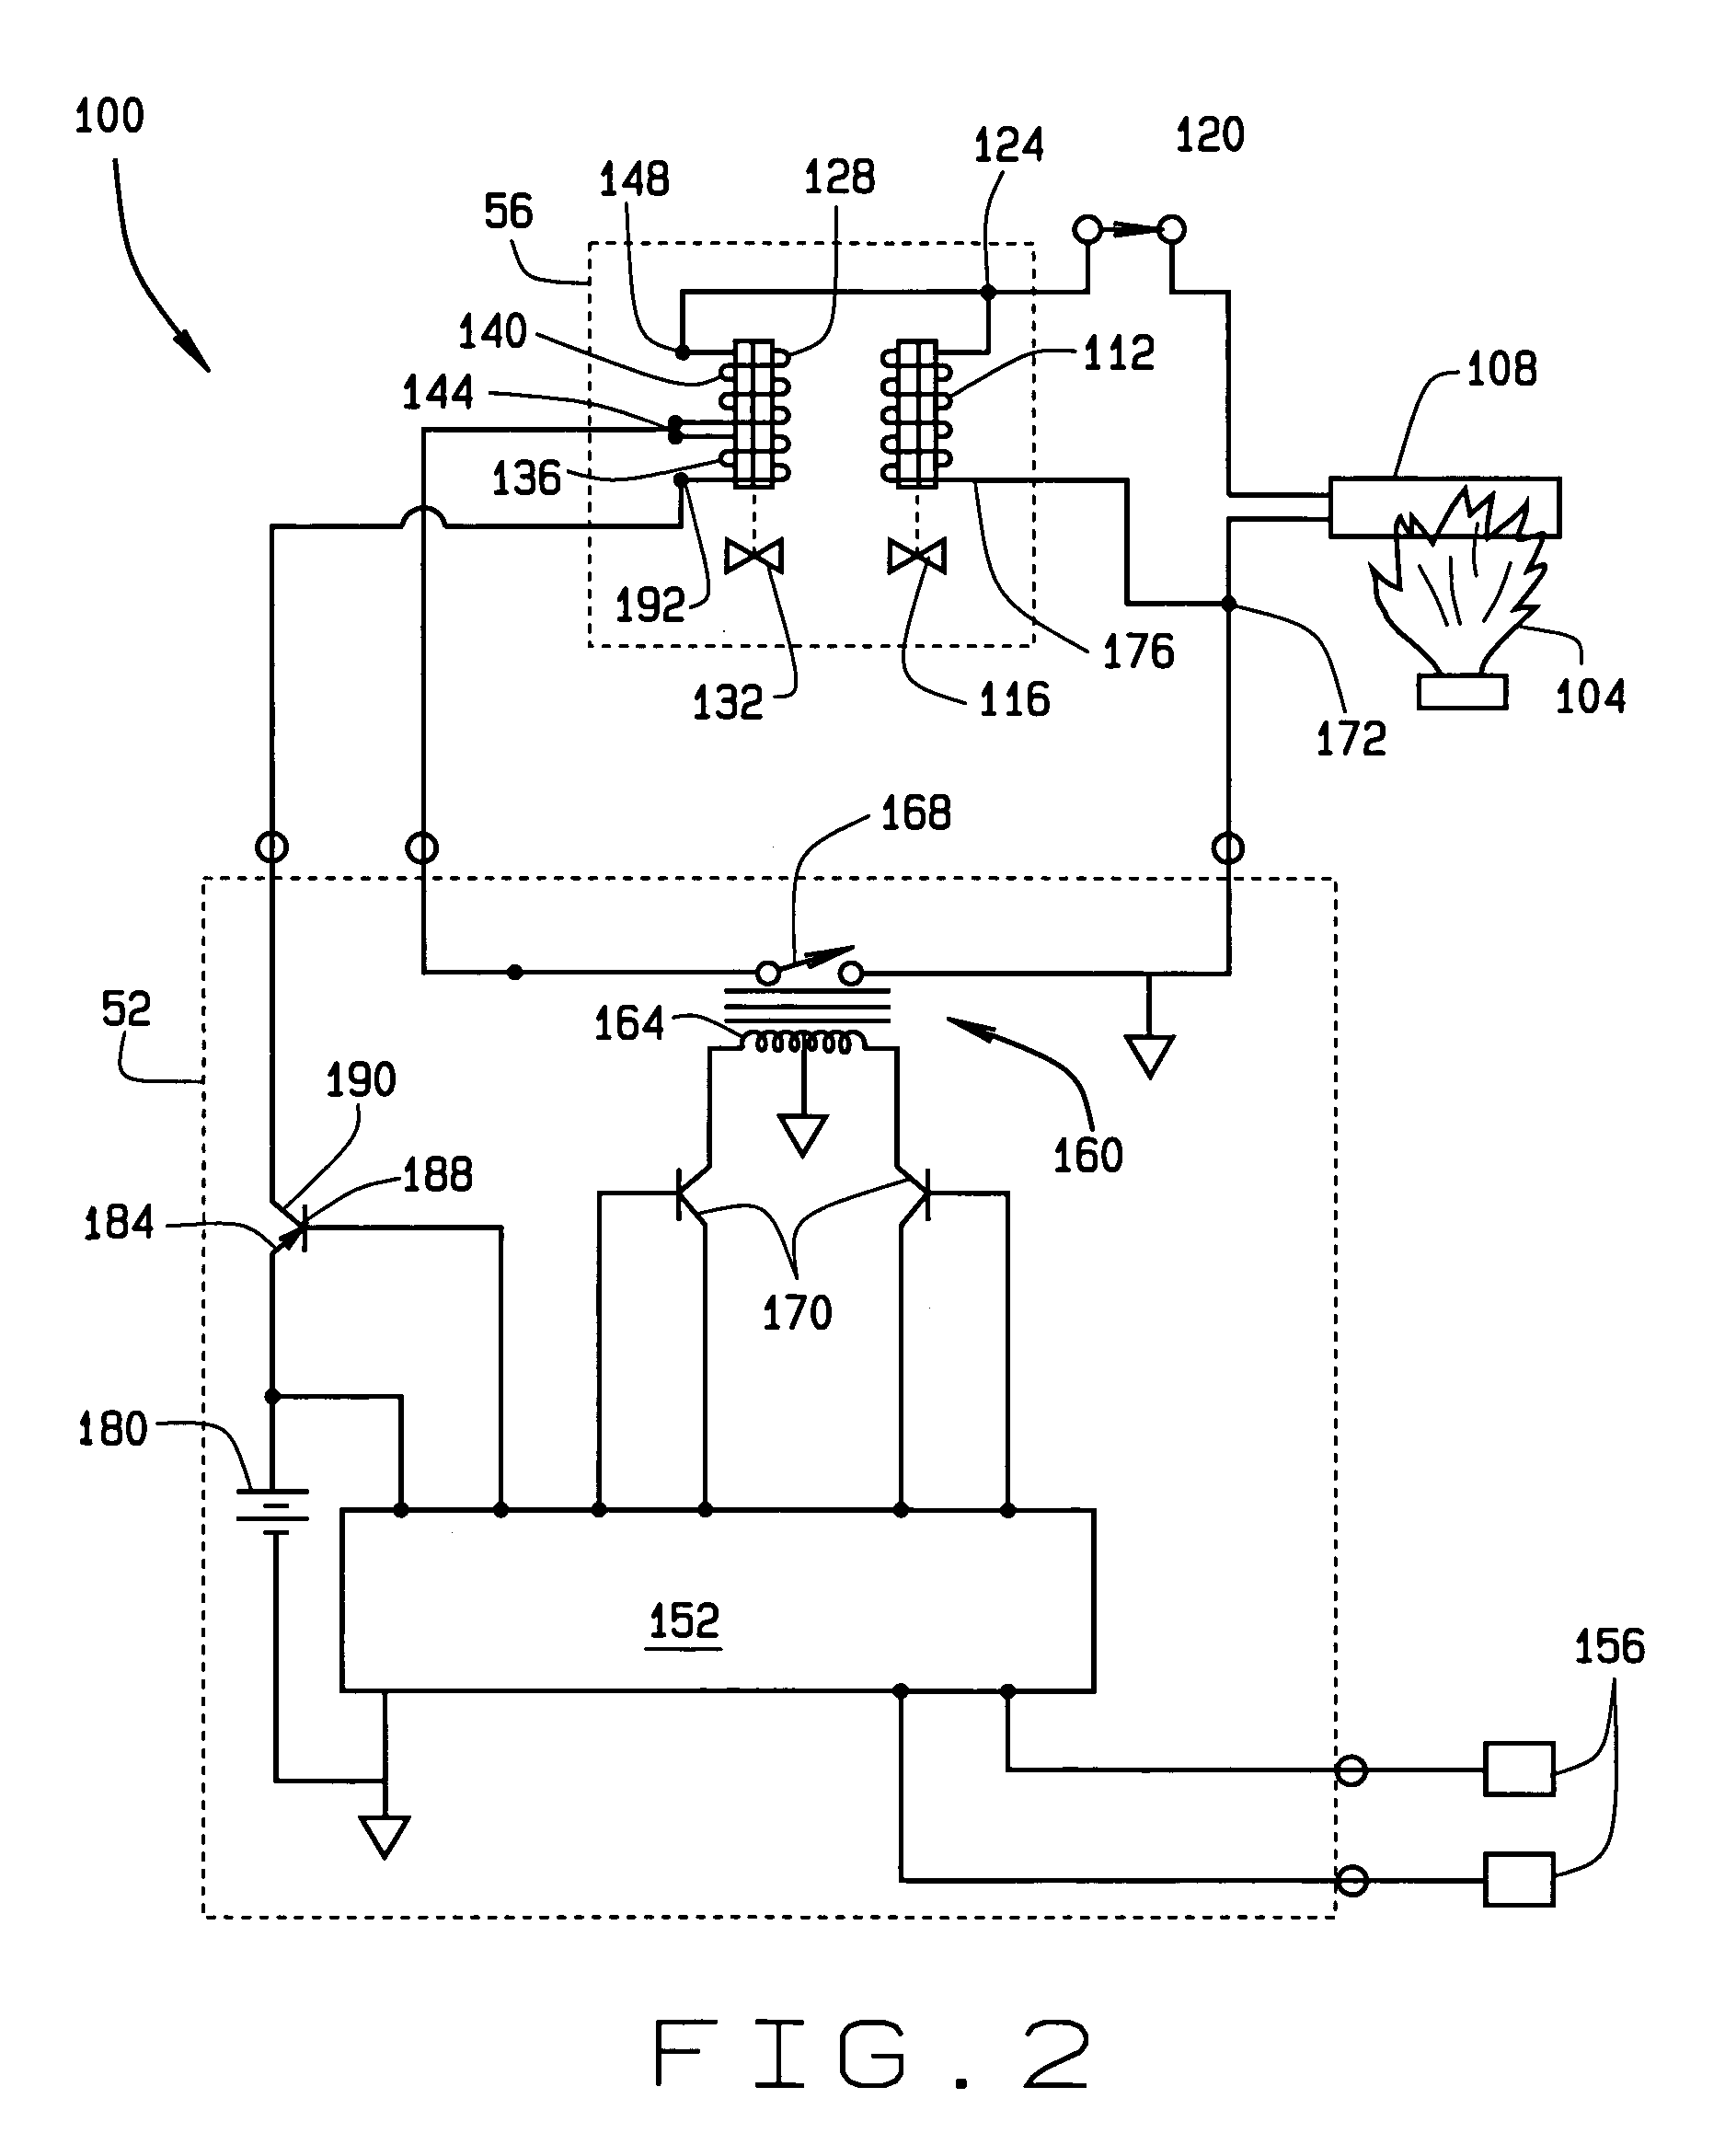 Apparatus and methods for operating a gas valve